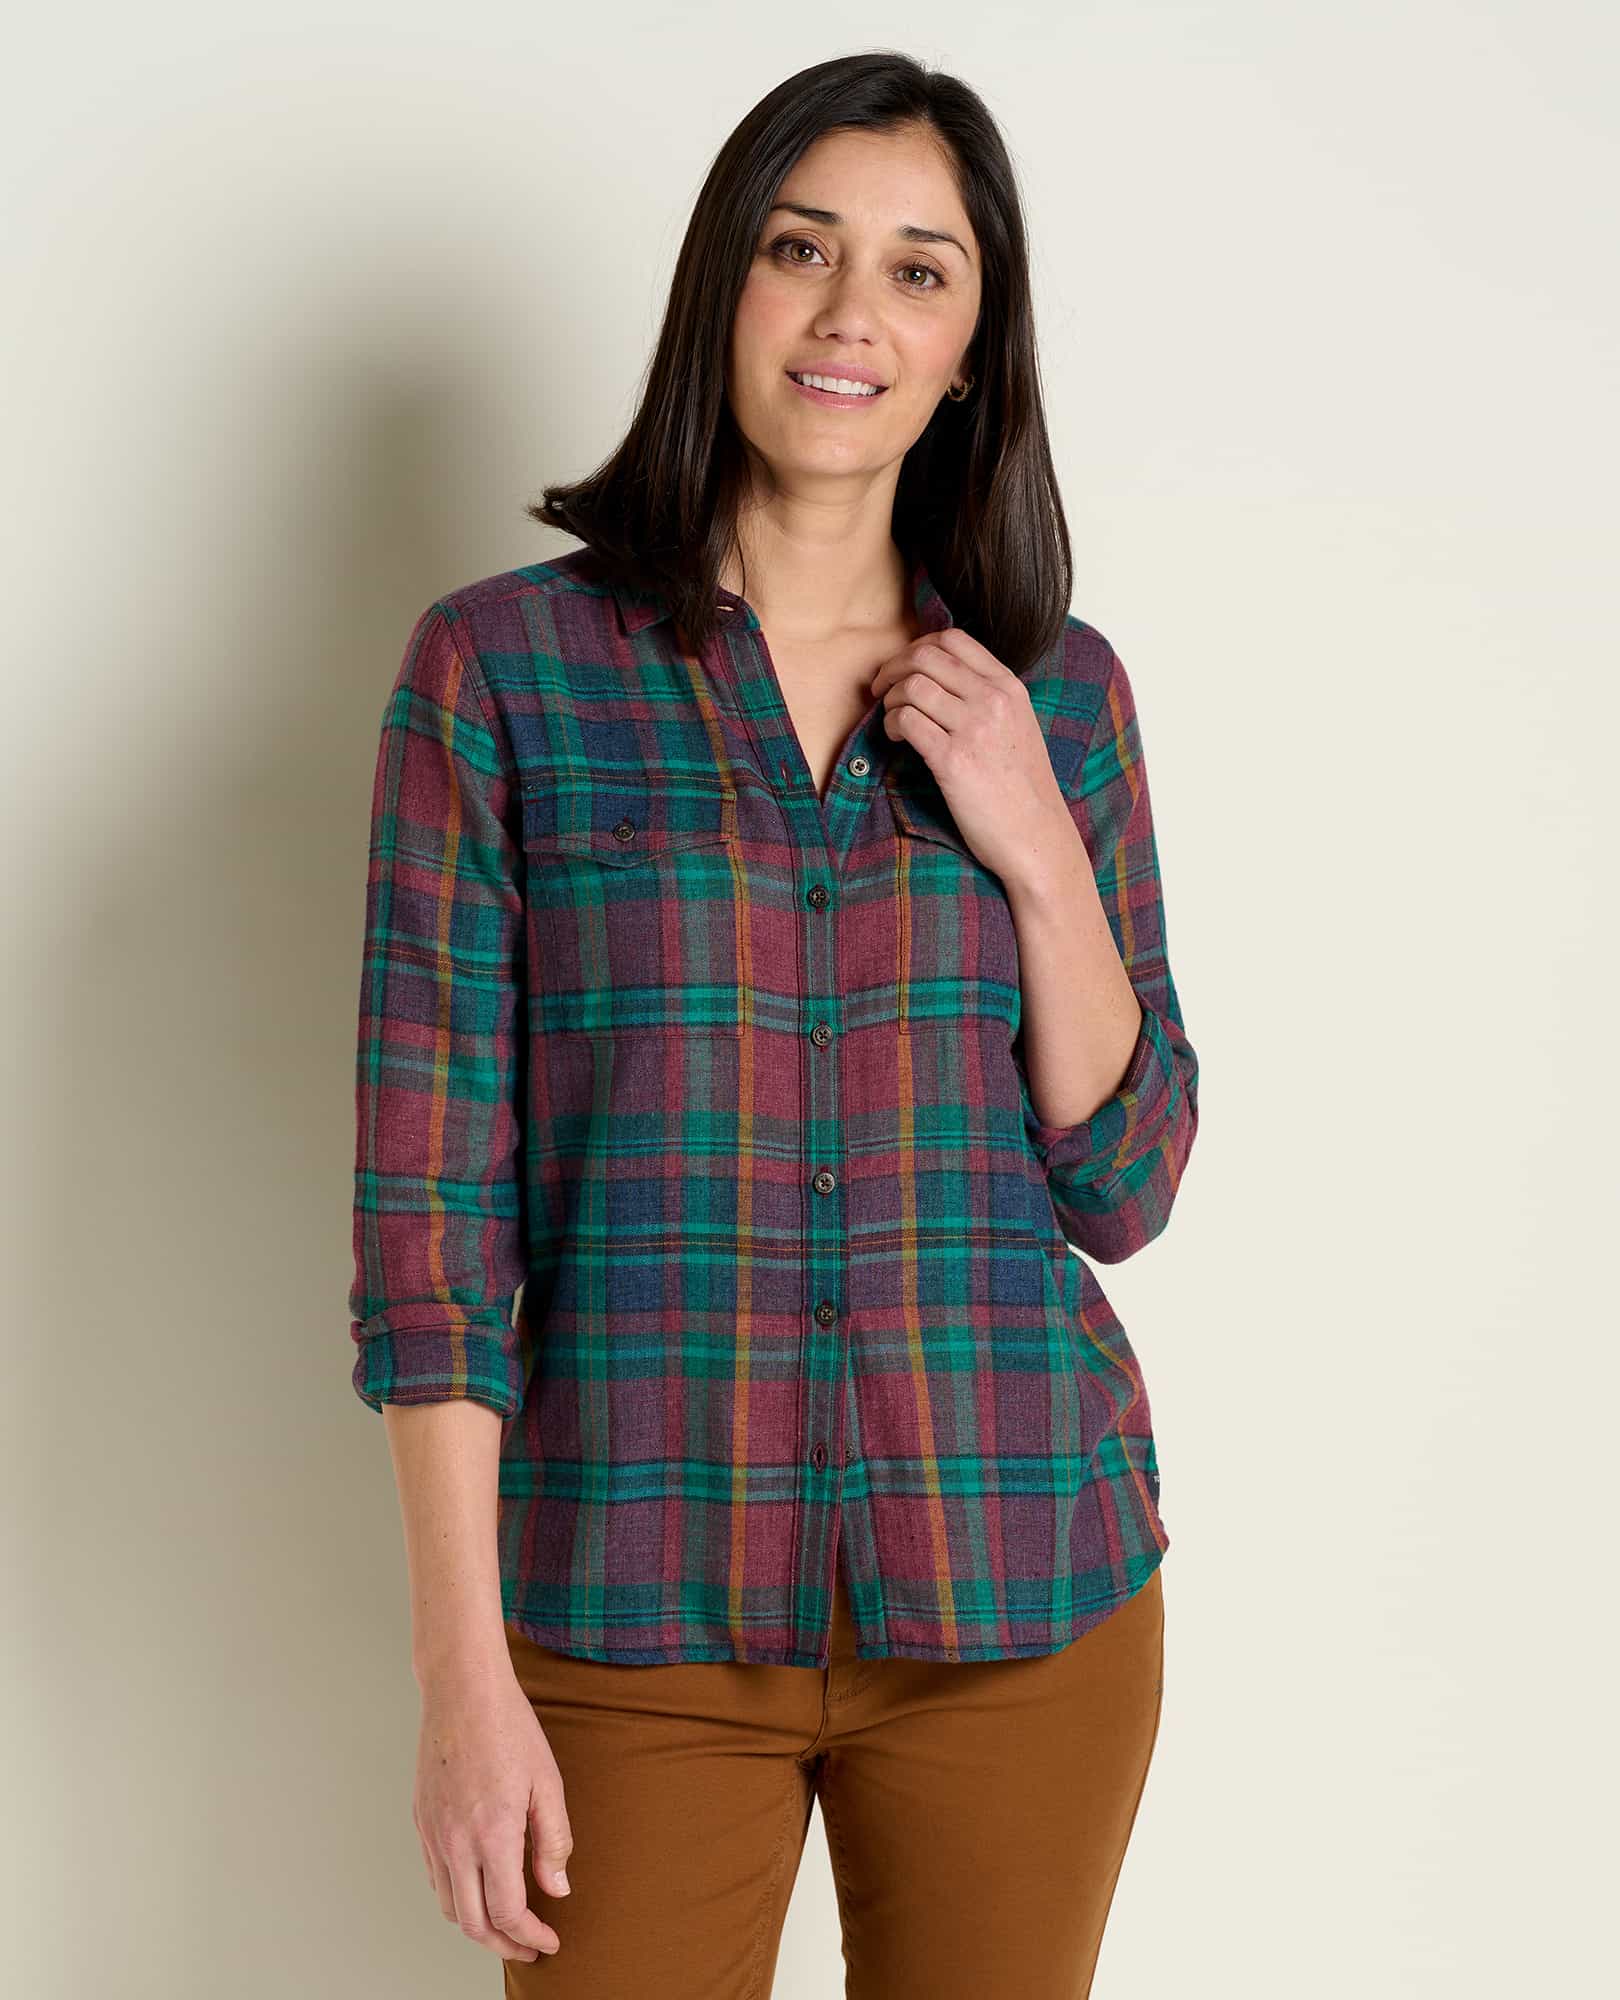 Toad & Co Women's Re-Form Flannel Shirt Aurora S